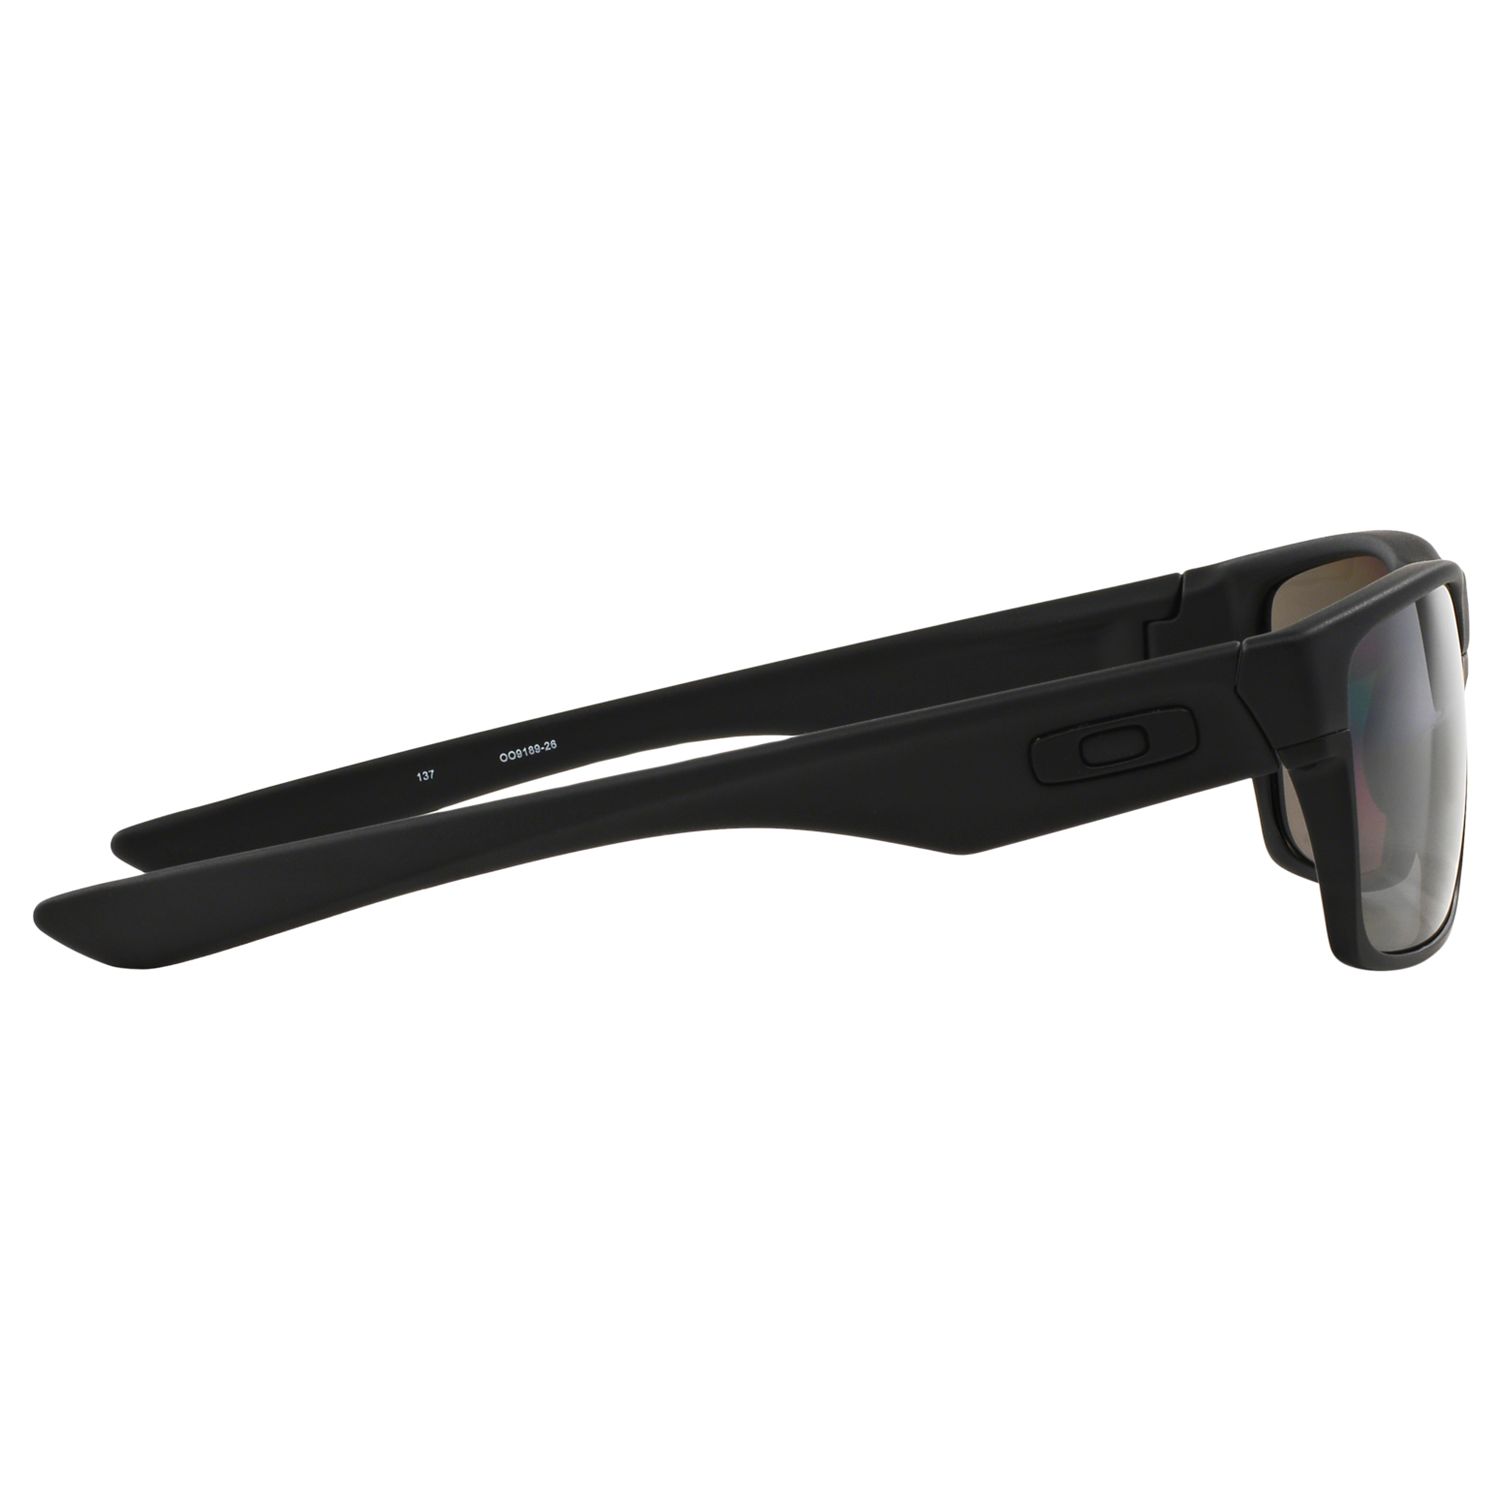 Buy Oakley OO9189 Two Face Prizm Daily Polarised Square Sunglasses Online at johnlewis.com